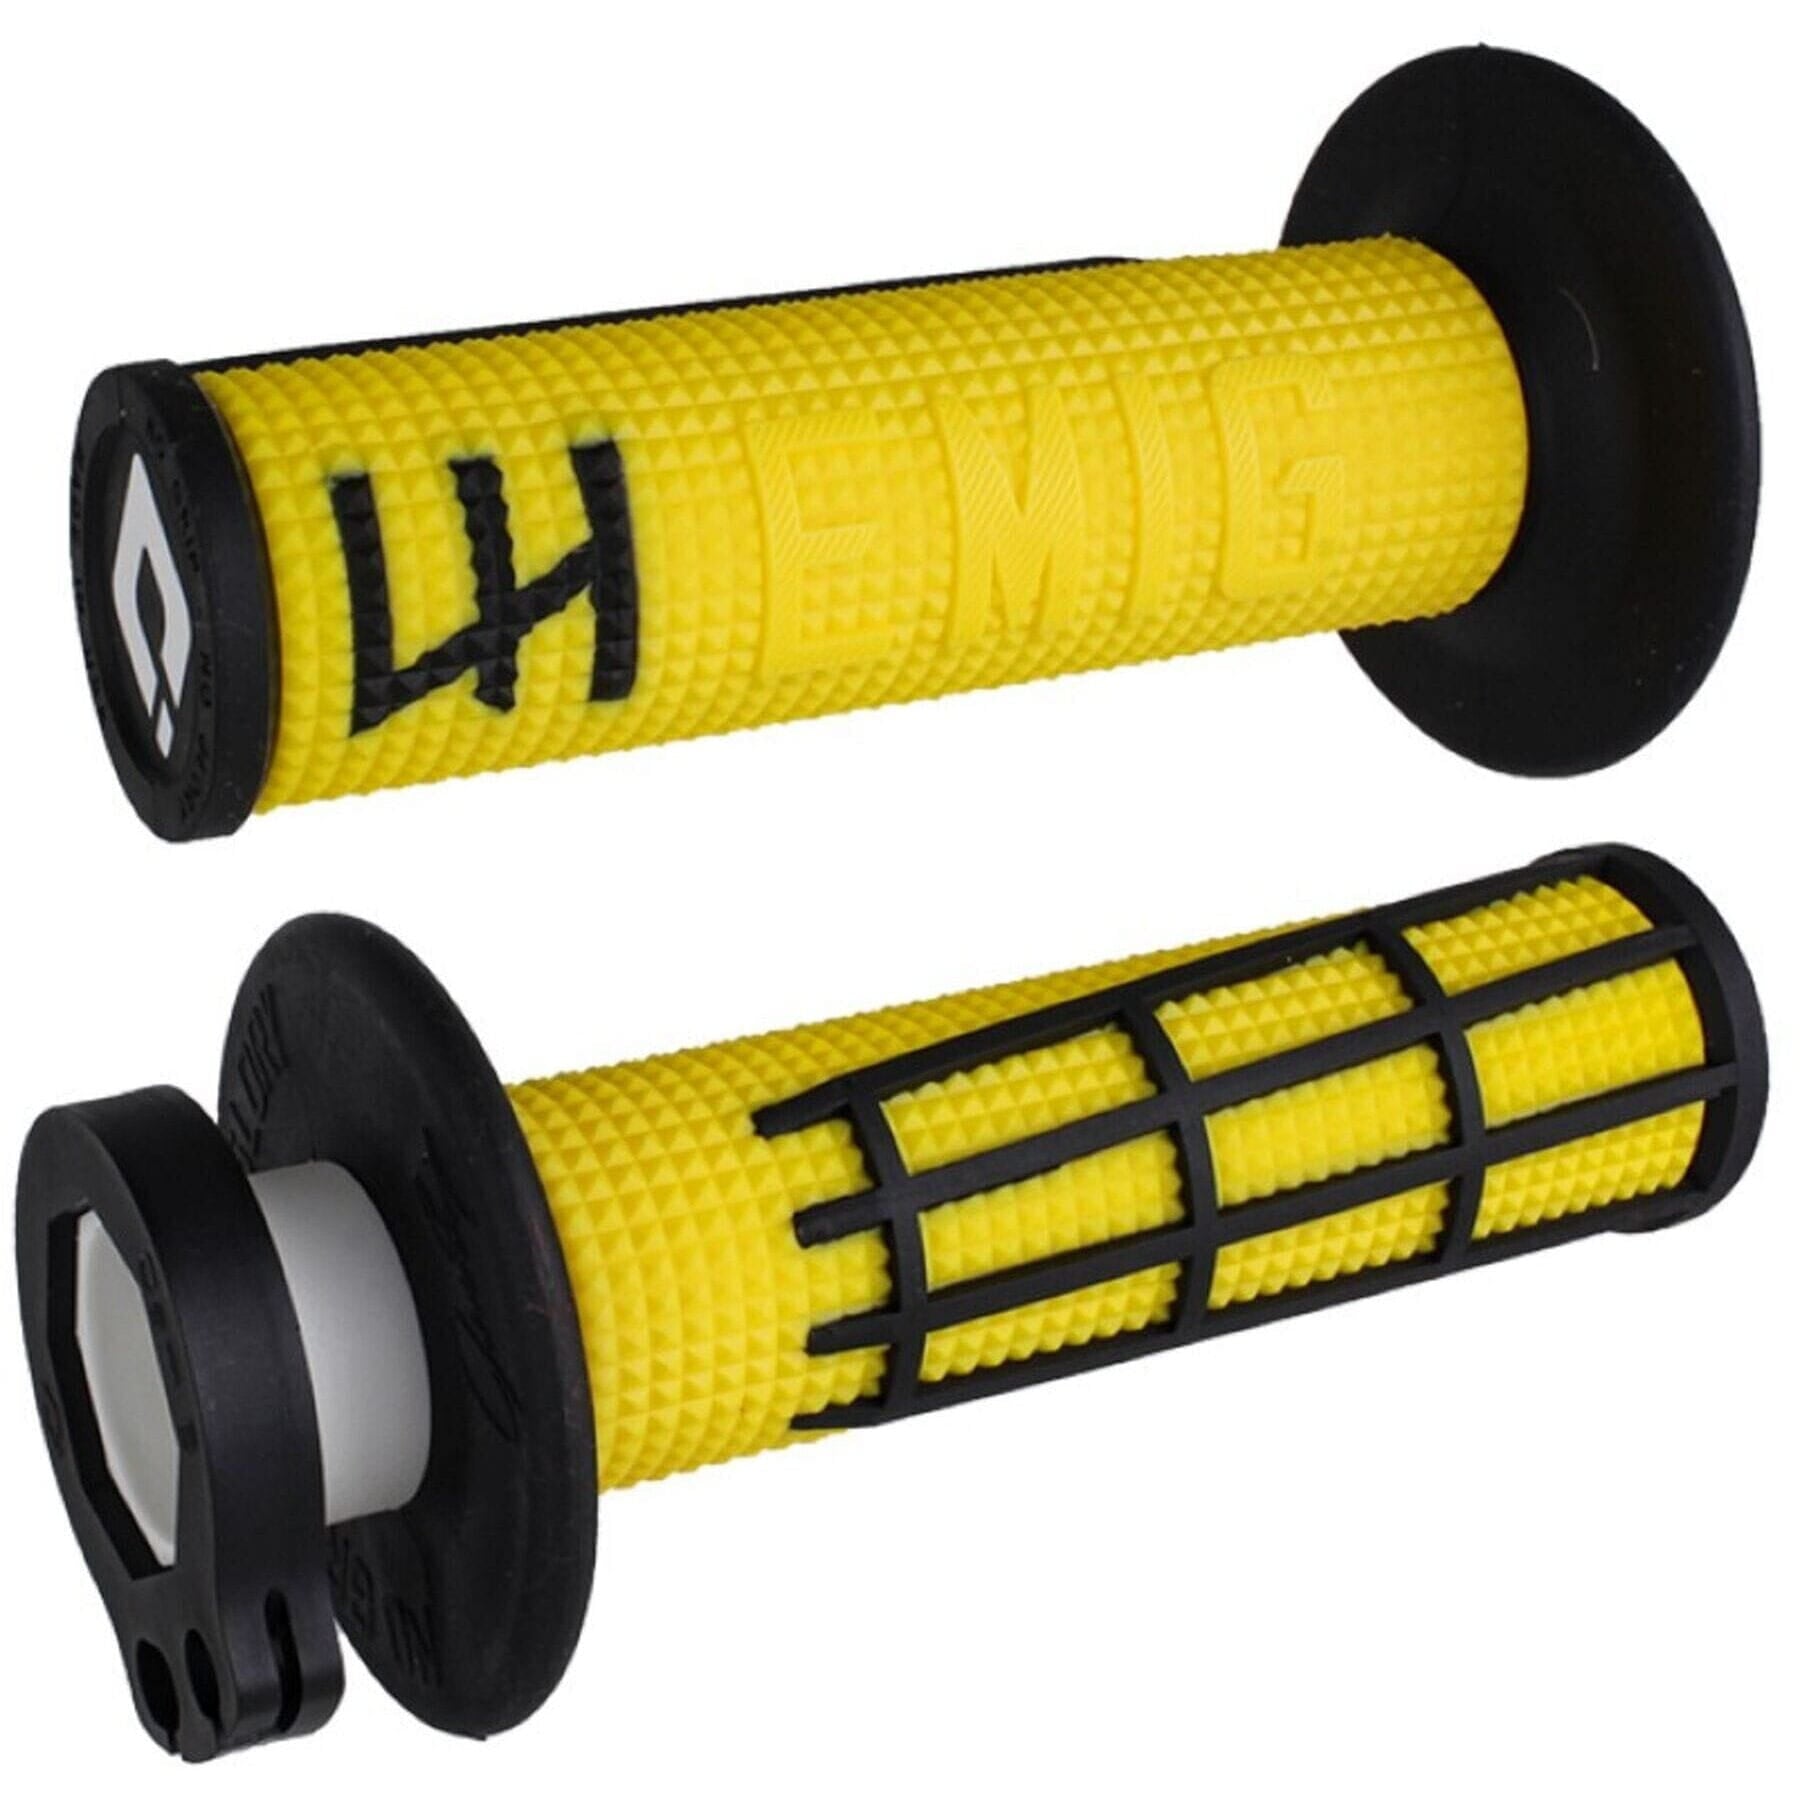 EMIG 2.0 Lock On Grip in Yellow and Black for Motorcycles